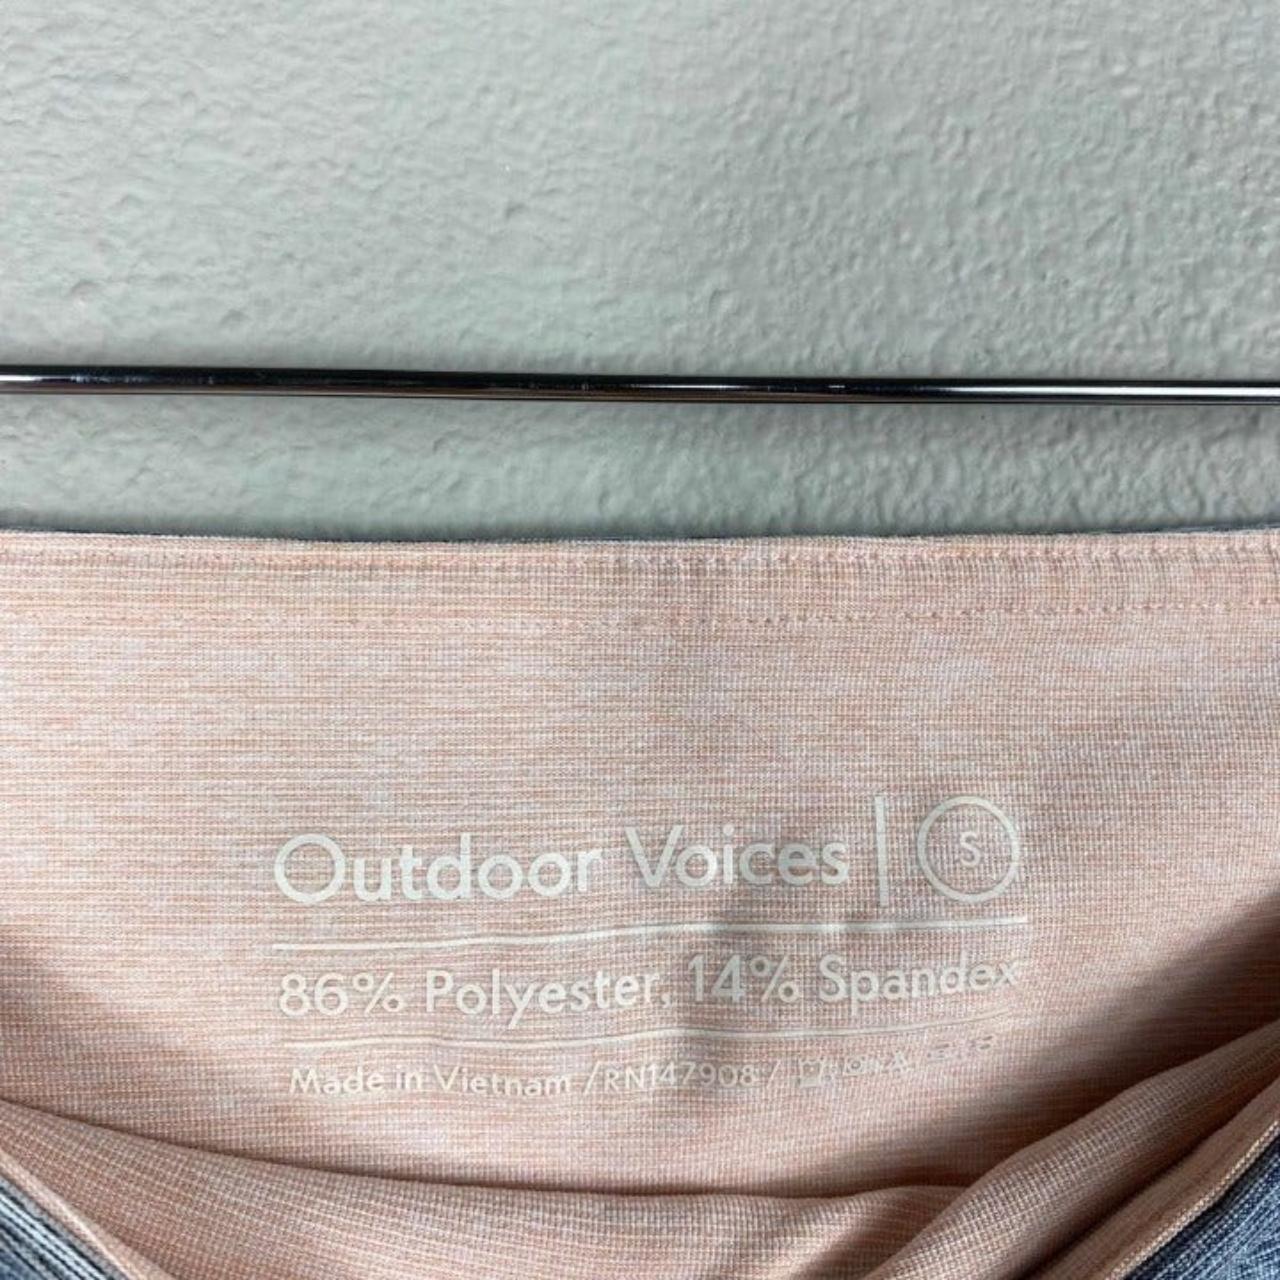 Product Image 2 - Outdoor voices Grey and pink